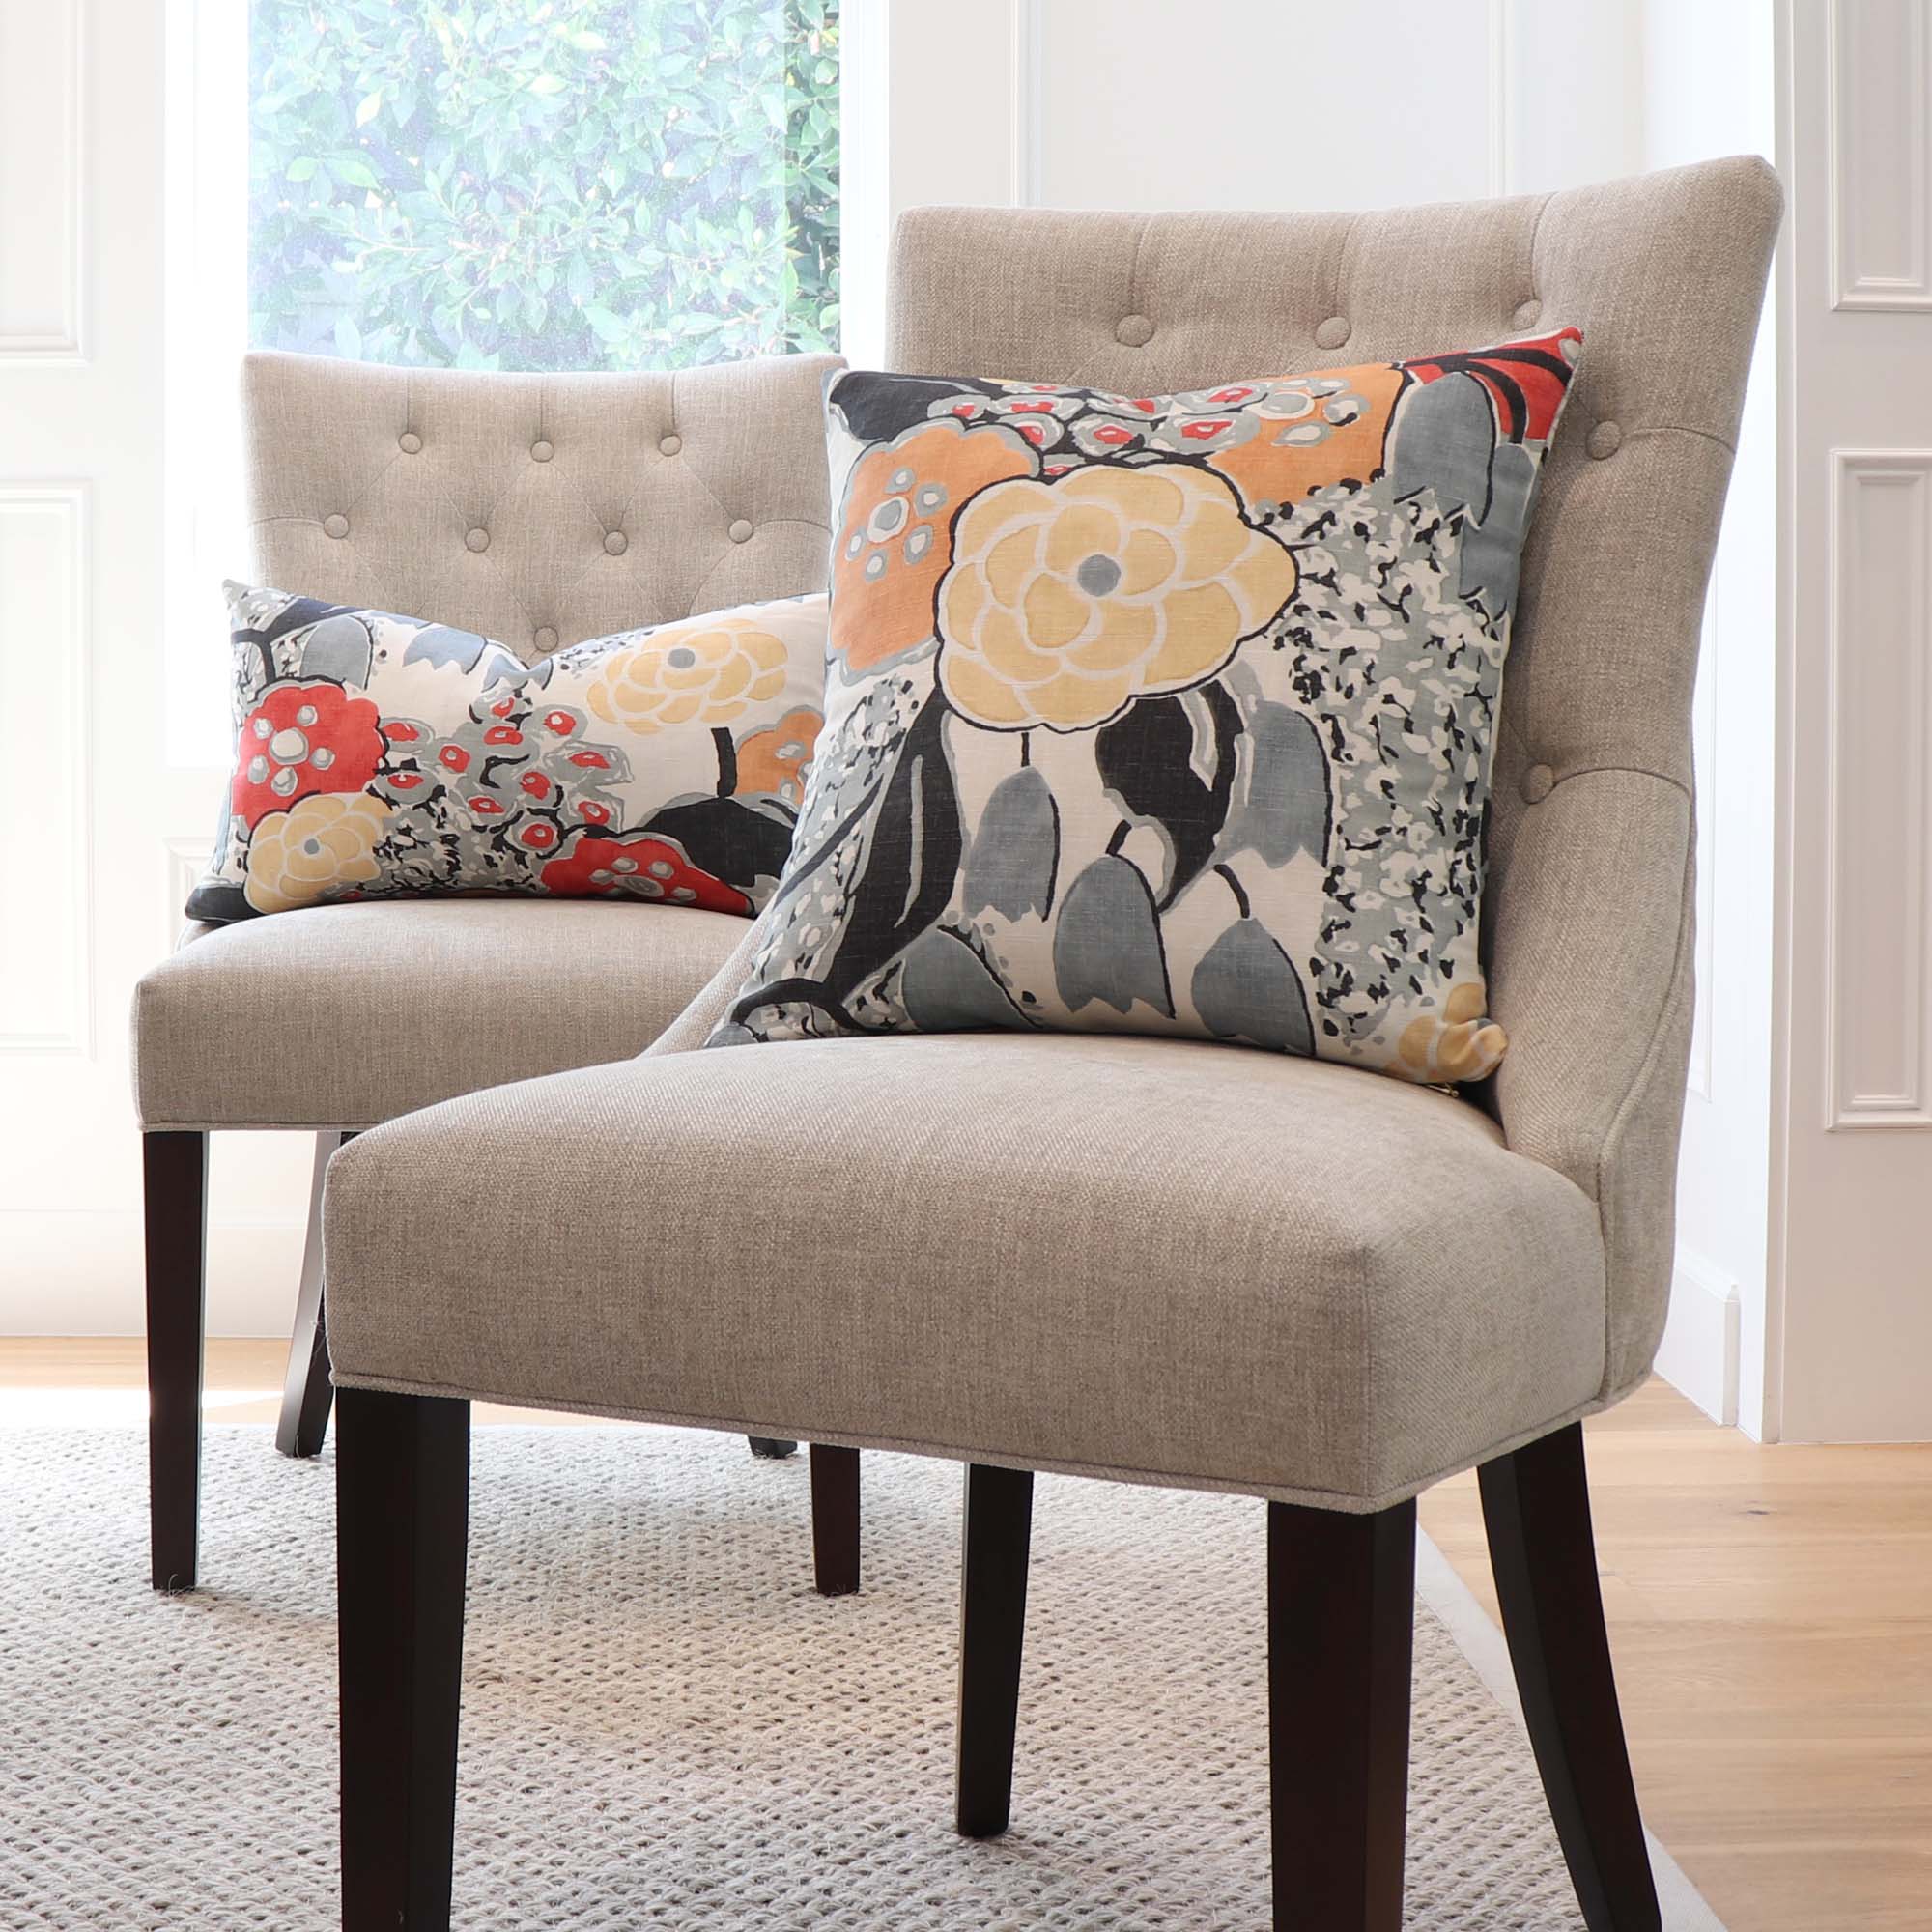 https://www.chloeandolive.com/cdn/shop/products/Thibaut-Anna-French-Laura-AF23103-Coral-Orange-Black-Floral-Linen-Designer-Decorative-Throw-Pillow-Cover-on-Dining-Chairs-in-Home_5000x.jpg?v=1681184645